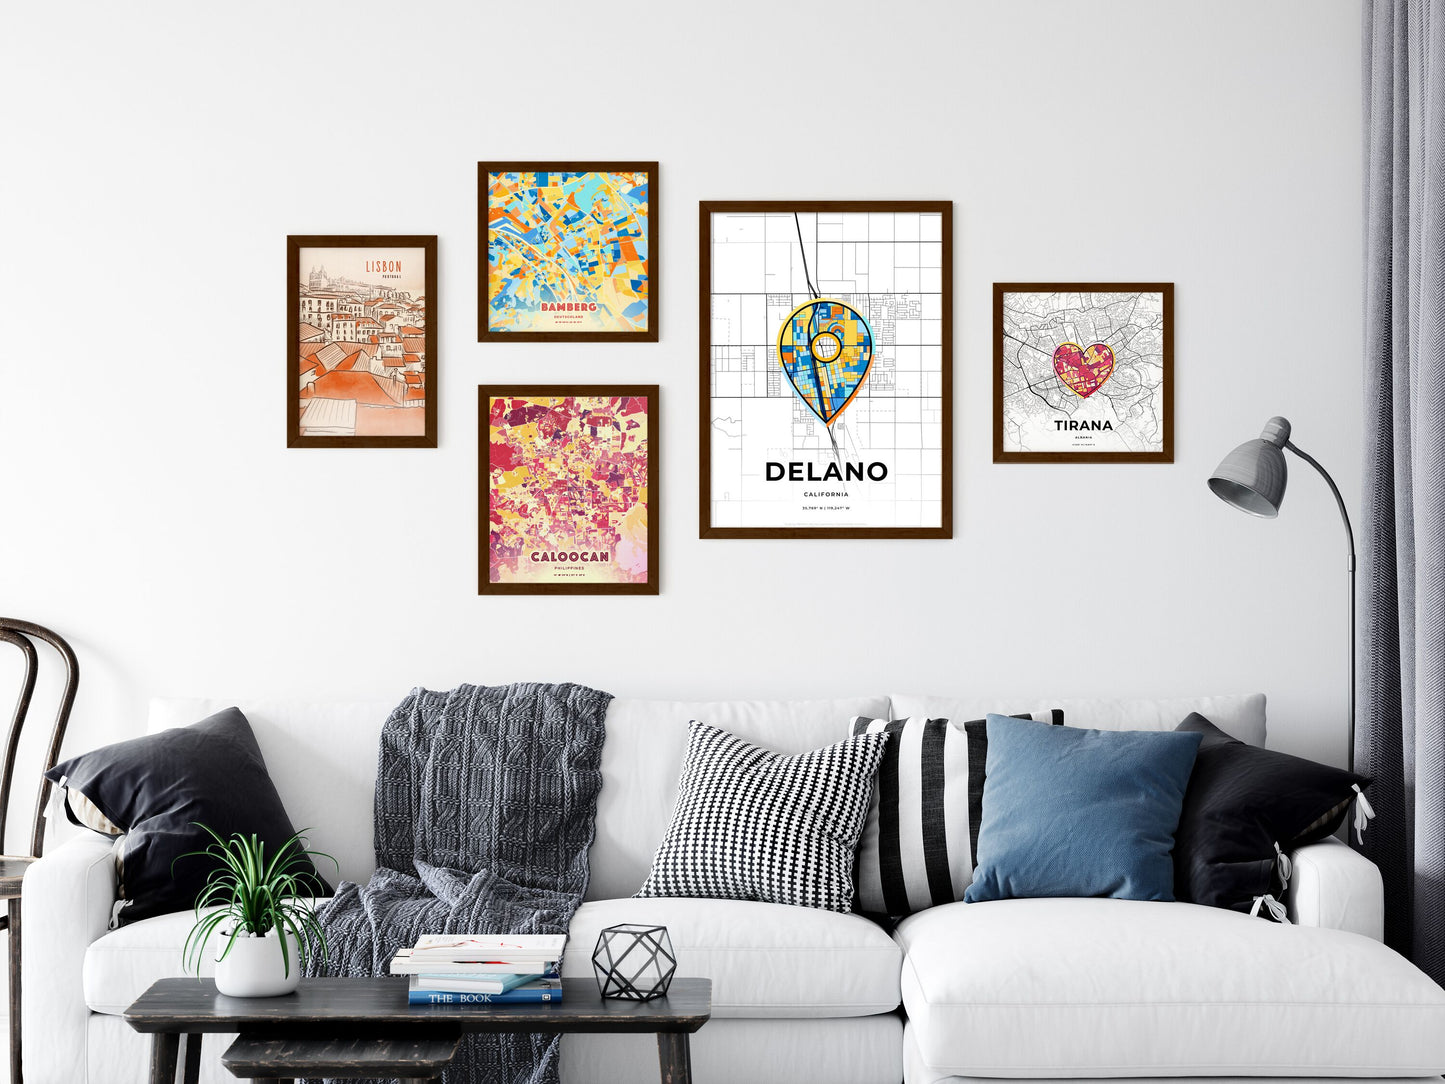 DELANO CALIFORNIA minimal art map with a colorful icon. Where it all began, Couple map gift.